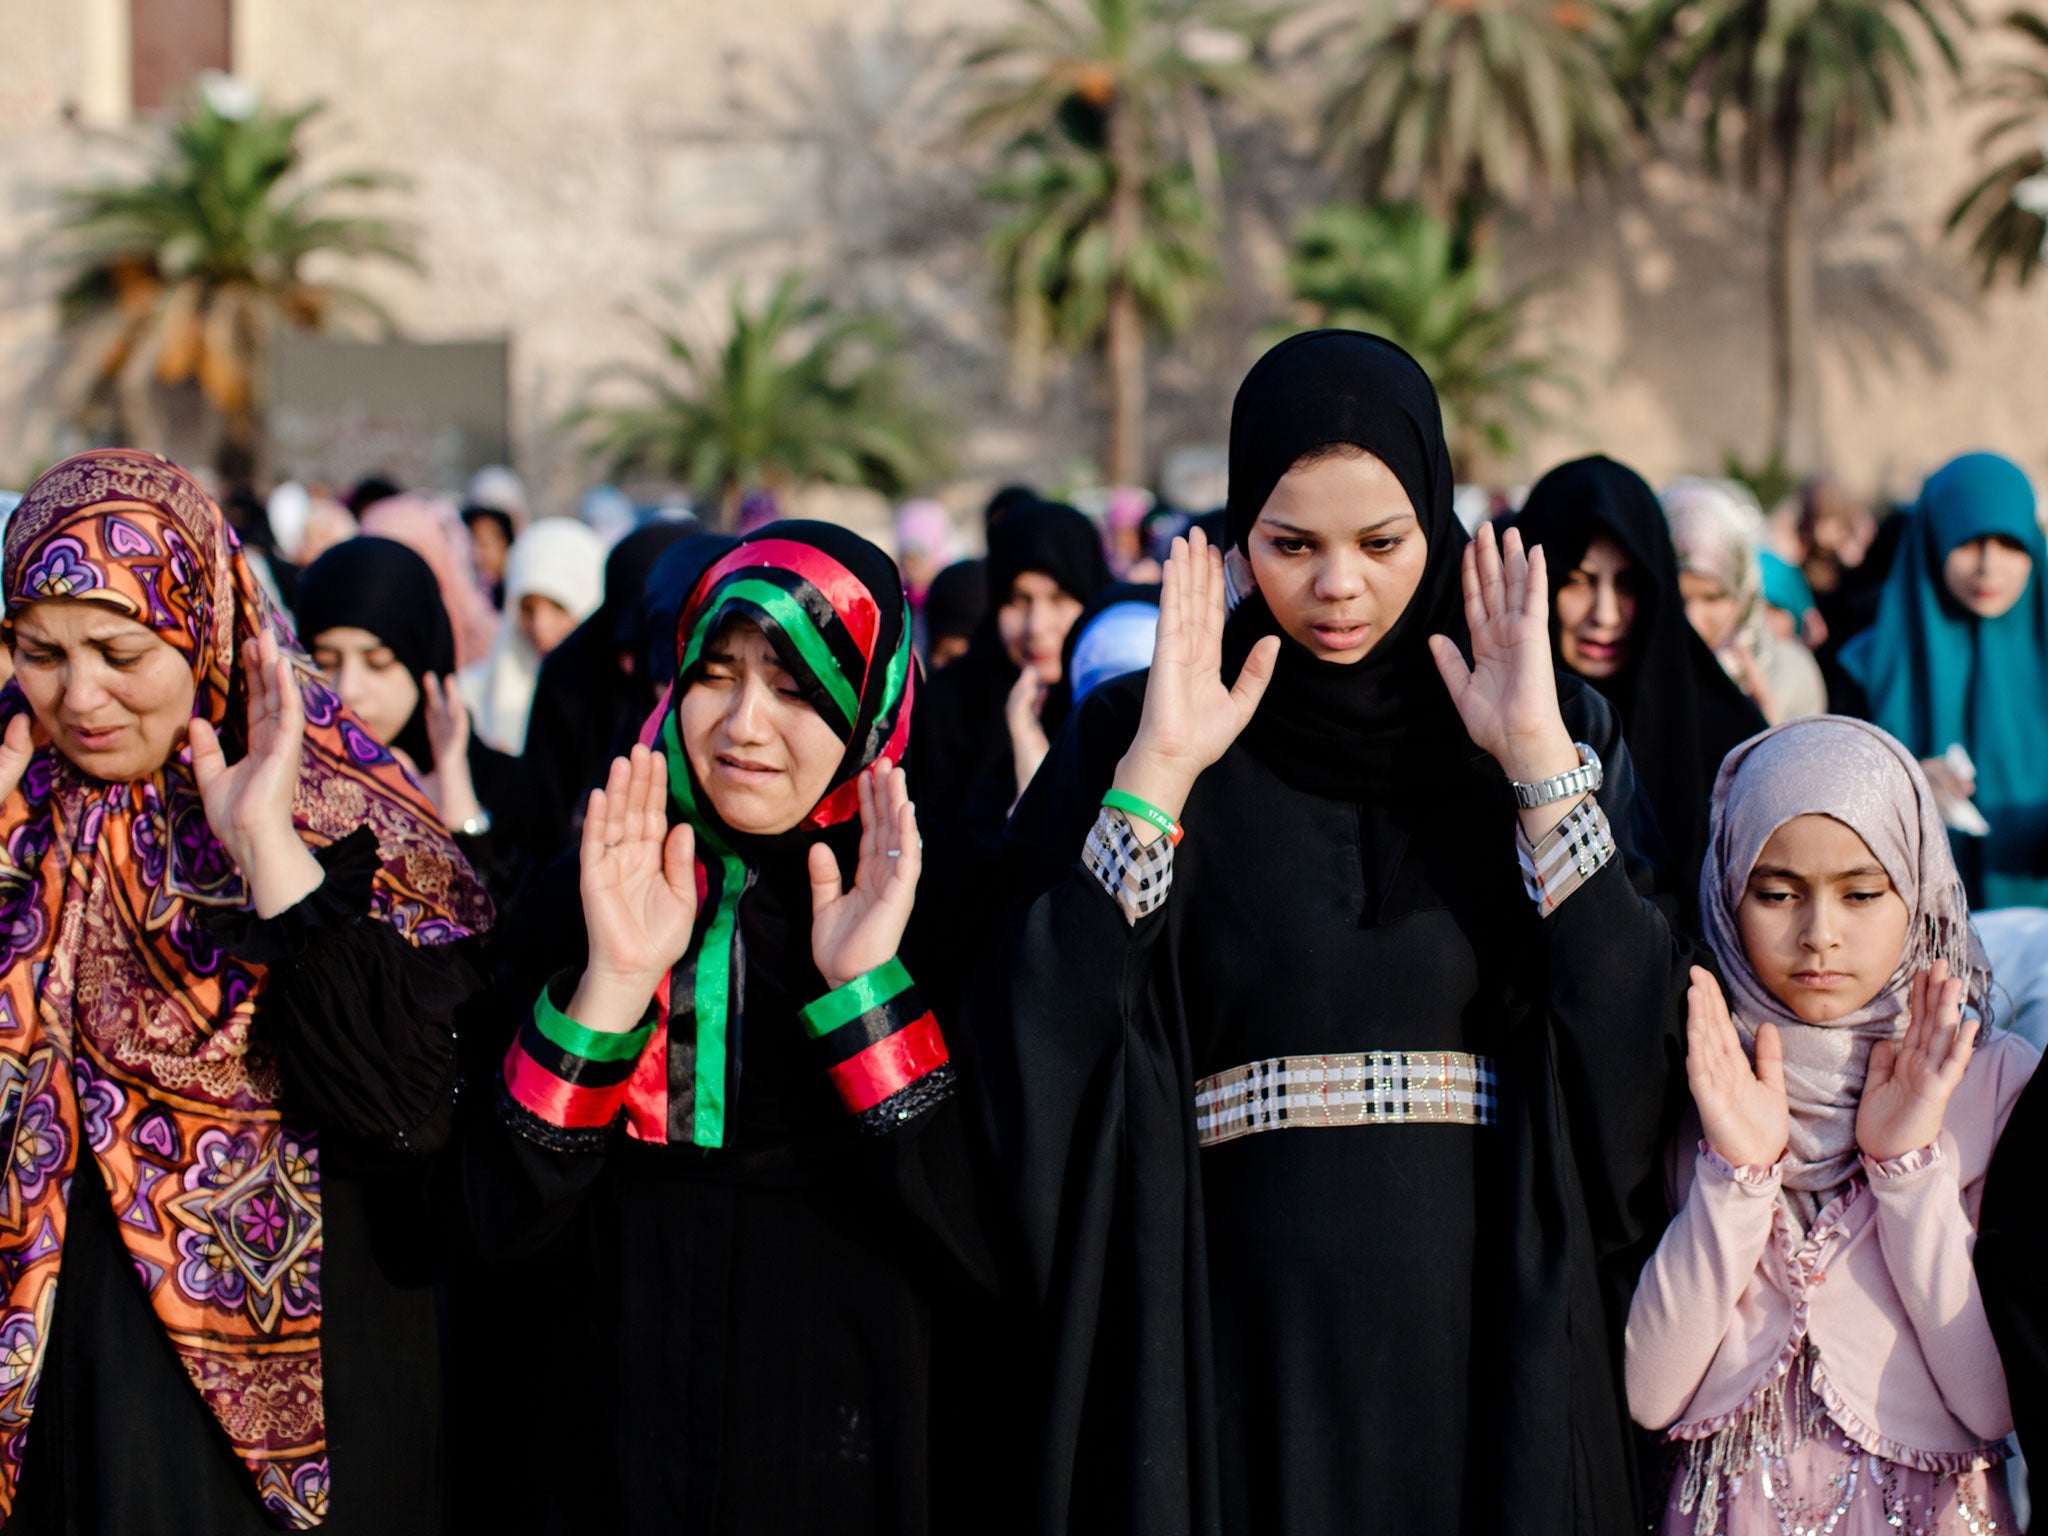 Nearly half the people surveyed in Lebanon thought no head covering should be worn by women 